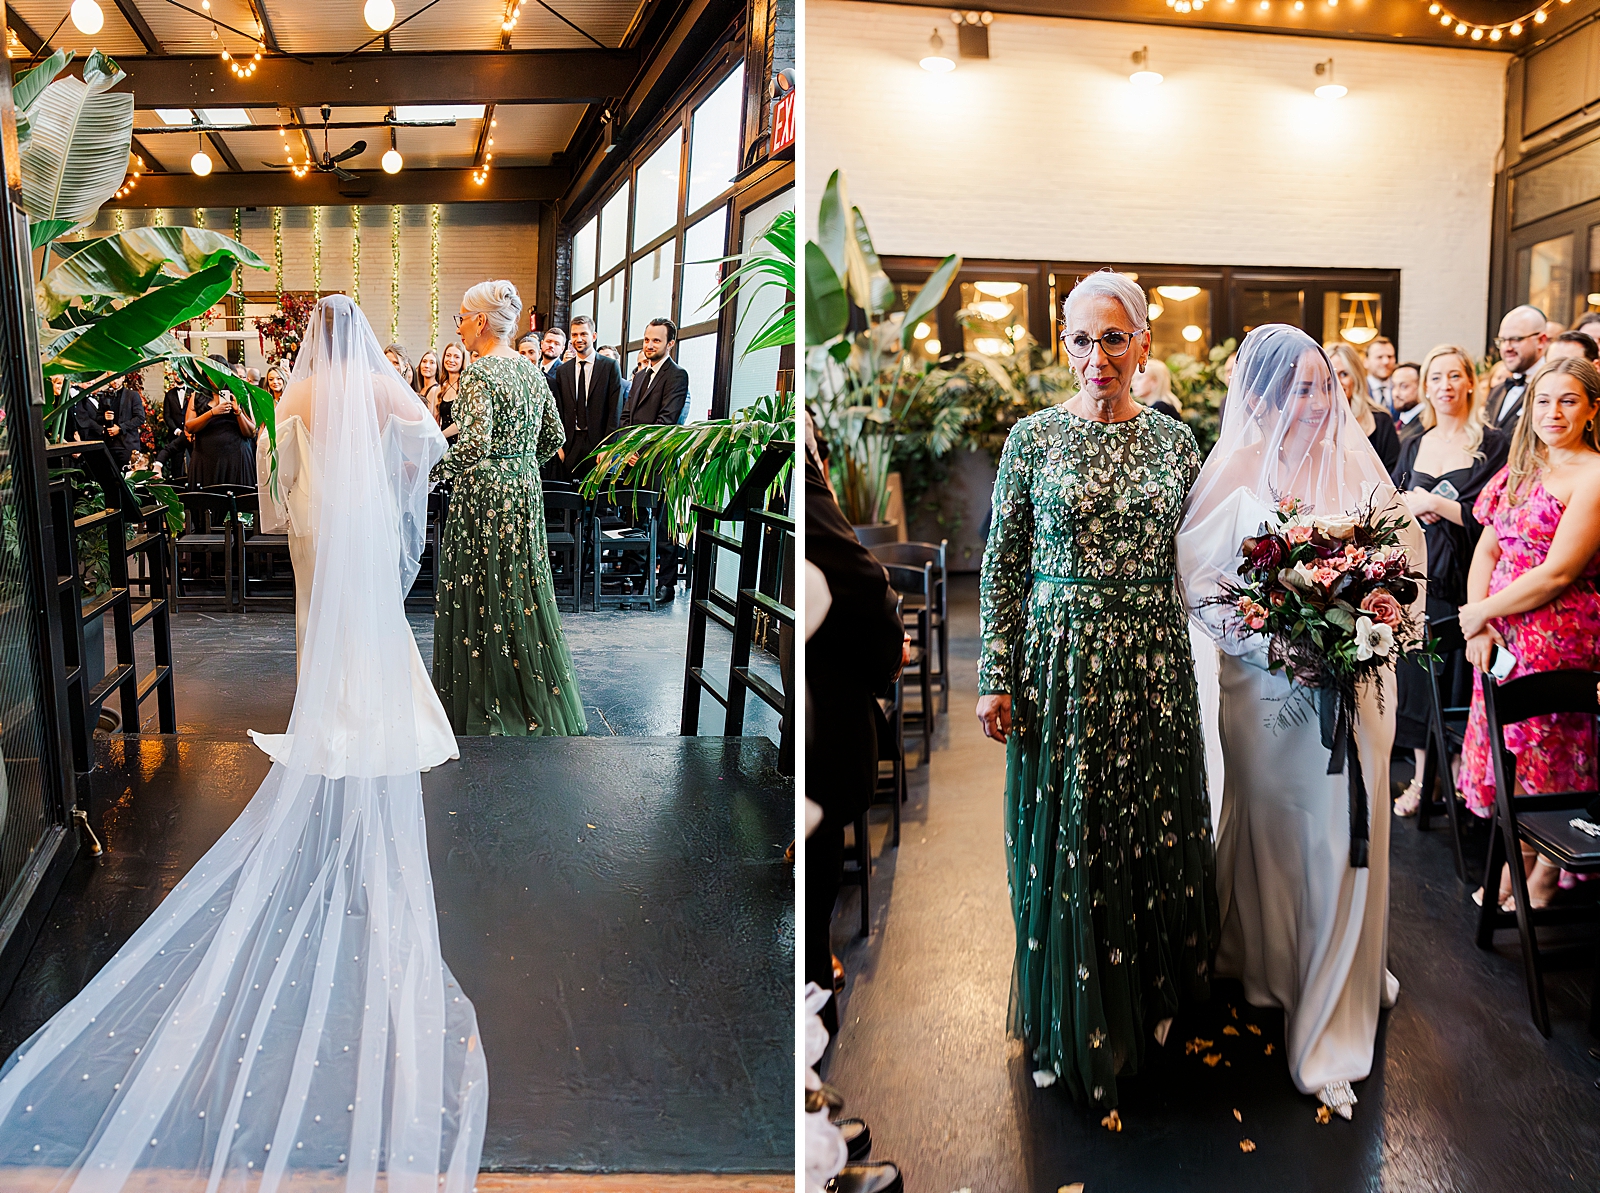 Left photo: Photo of the bride and her mother walking down the aisle. Shot from behind. 
Right photo: Full body shot of the bride's mother walking the bride down the aisle. 